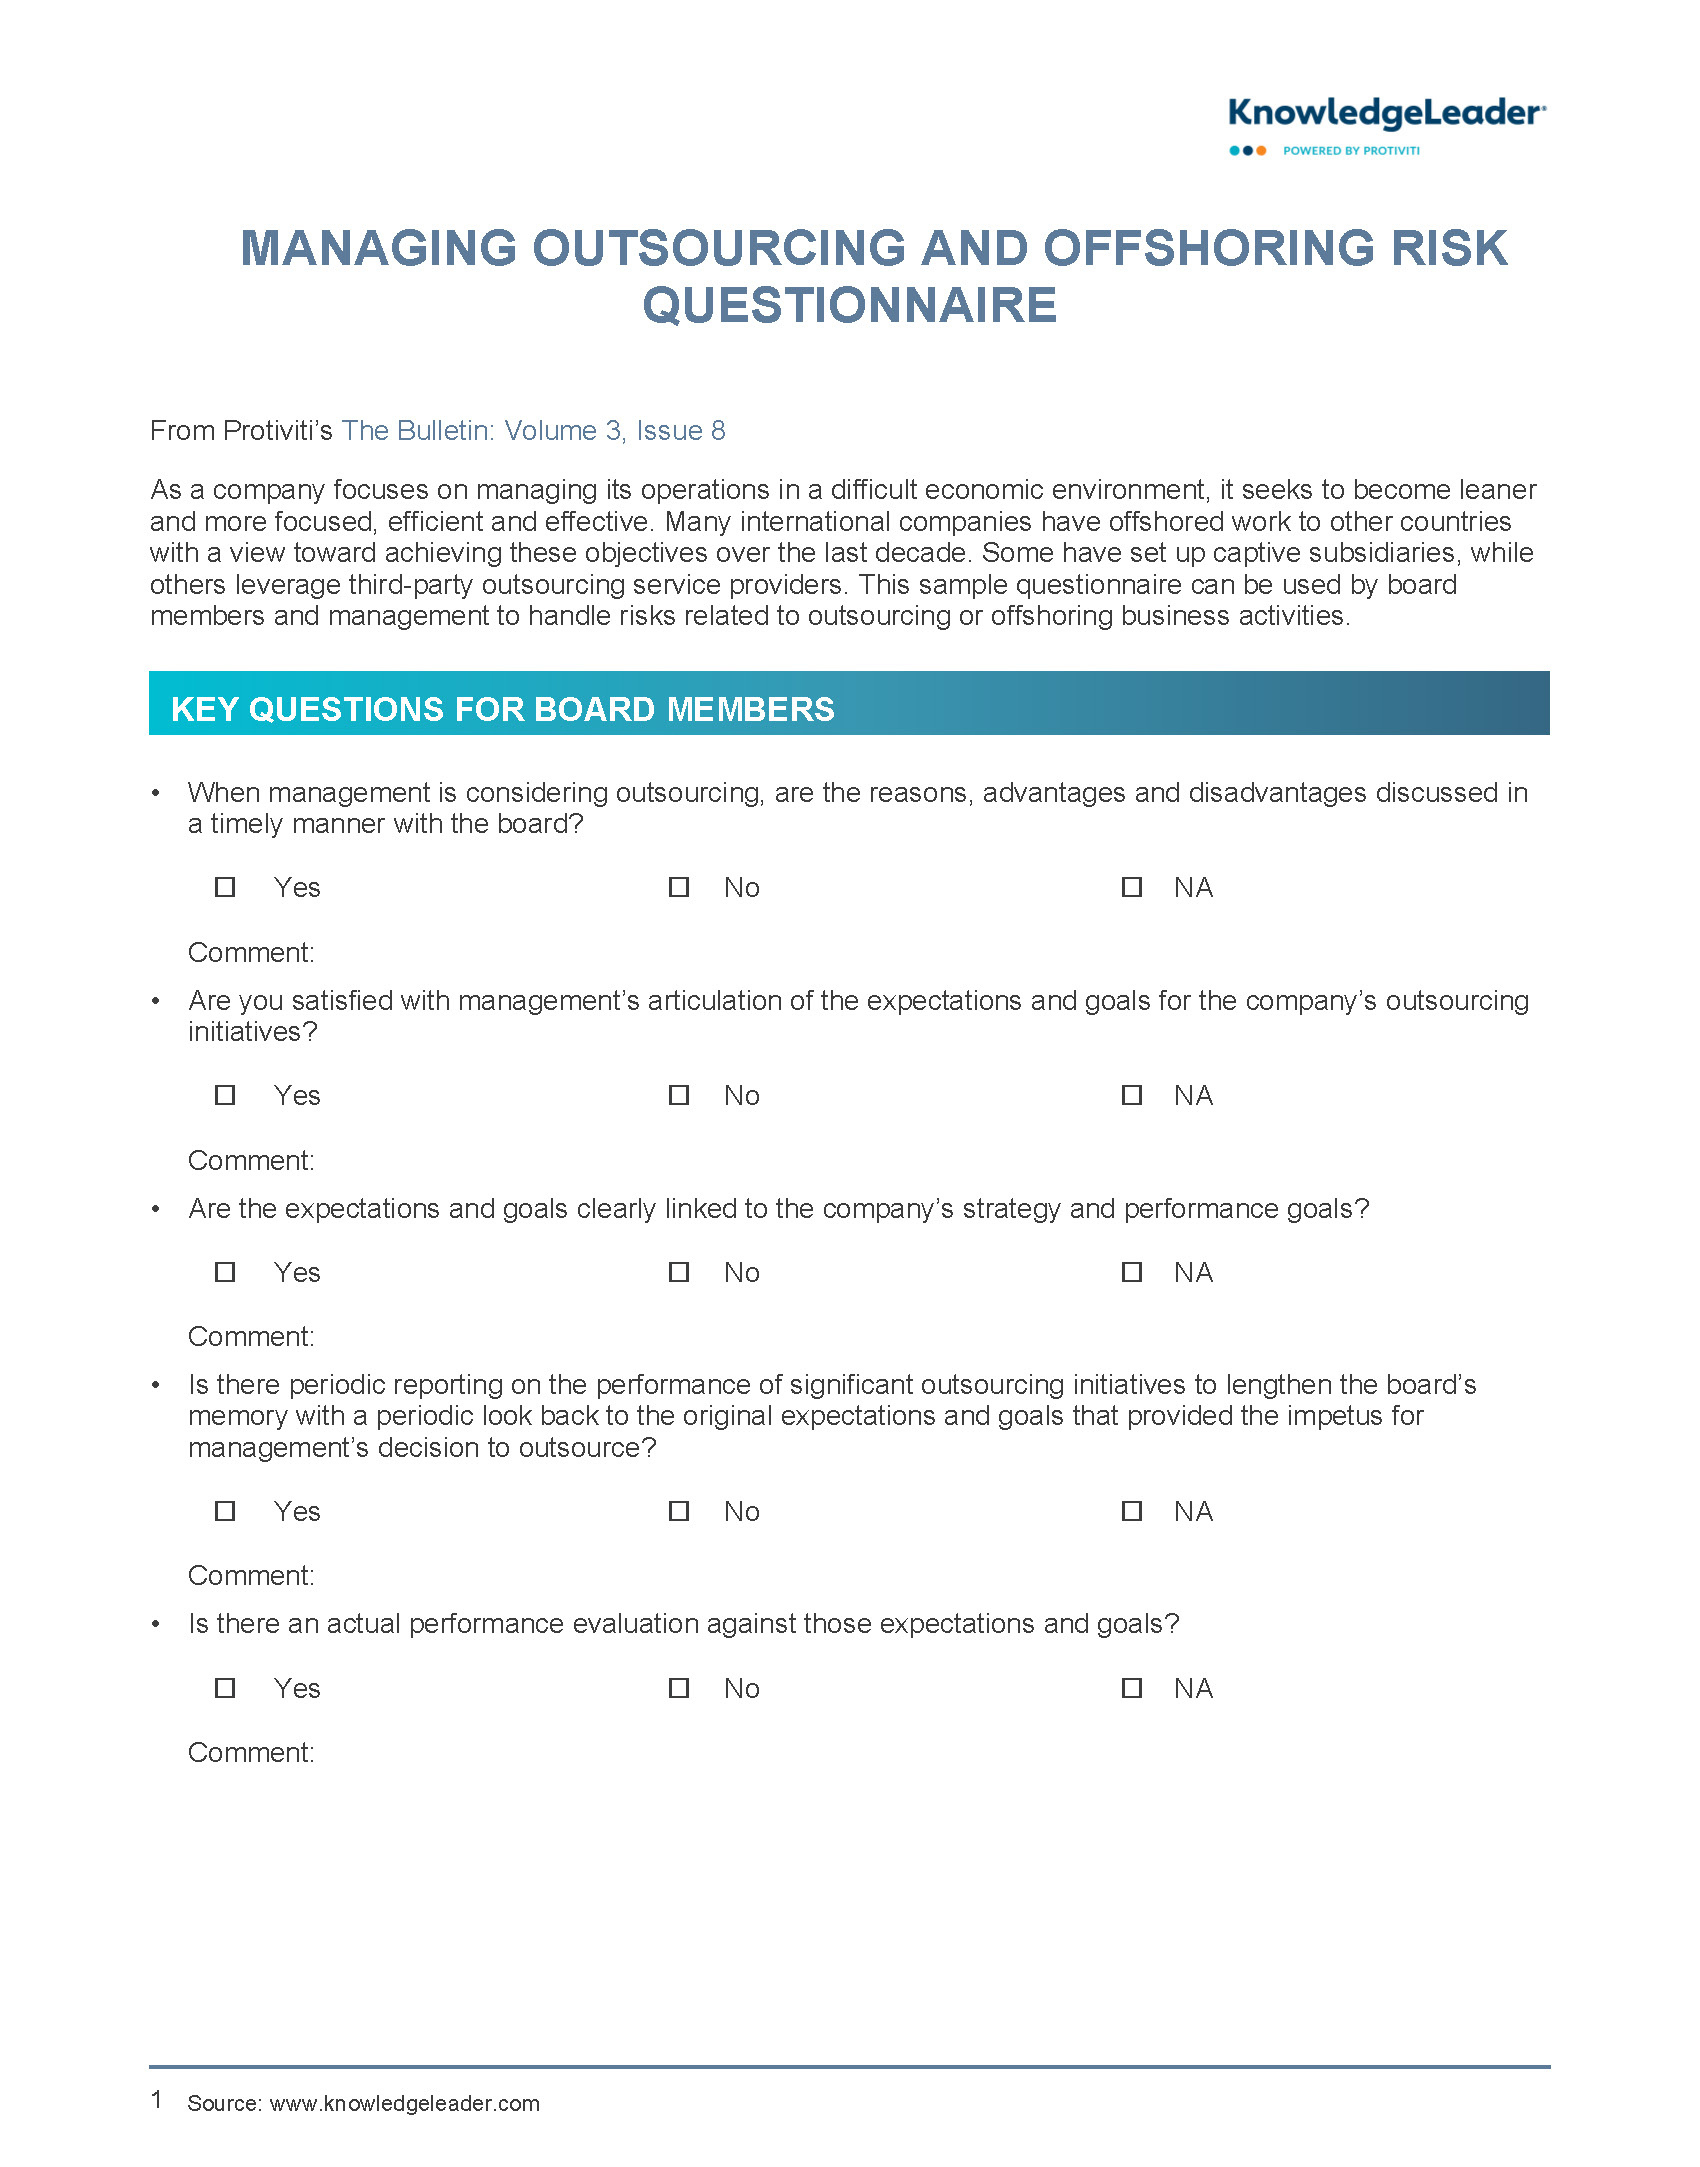 Managing Outsourcing and Offshoring Risk Questionnaire